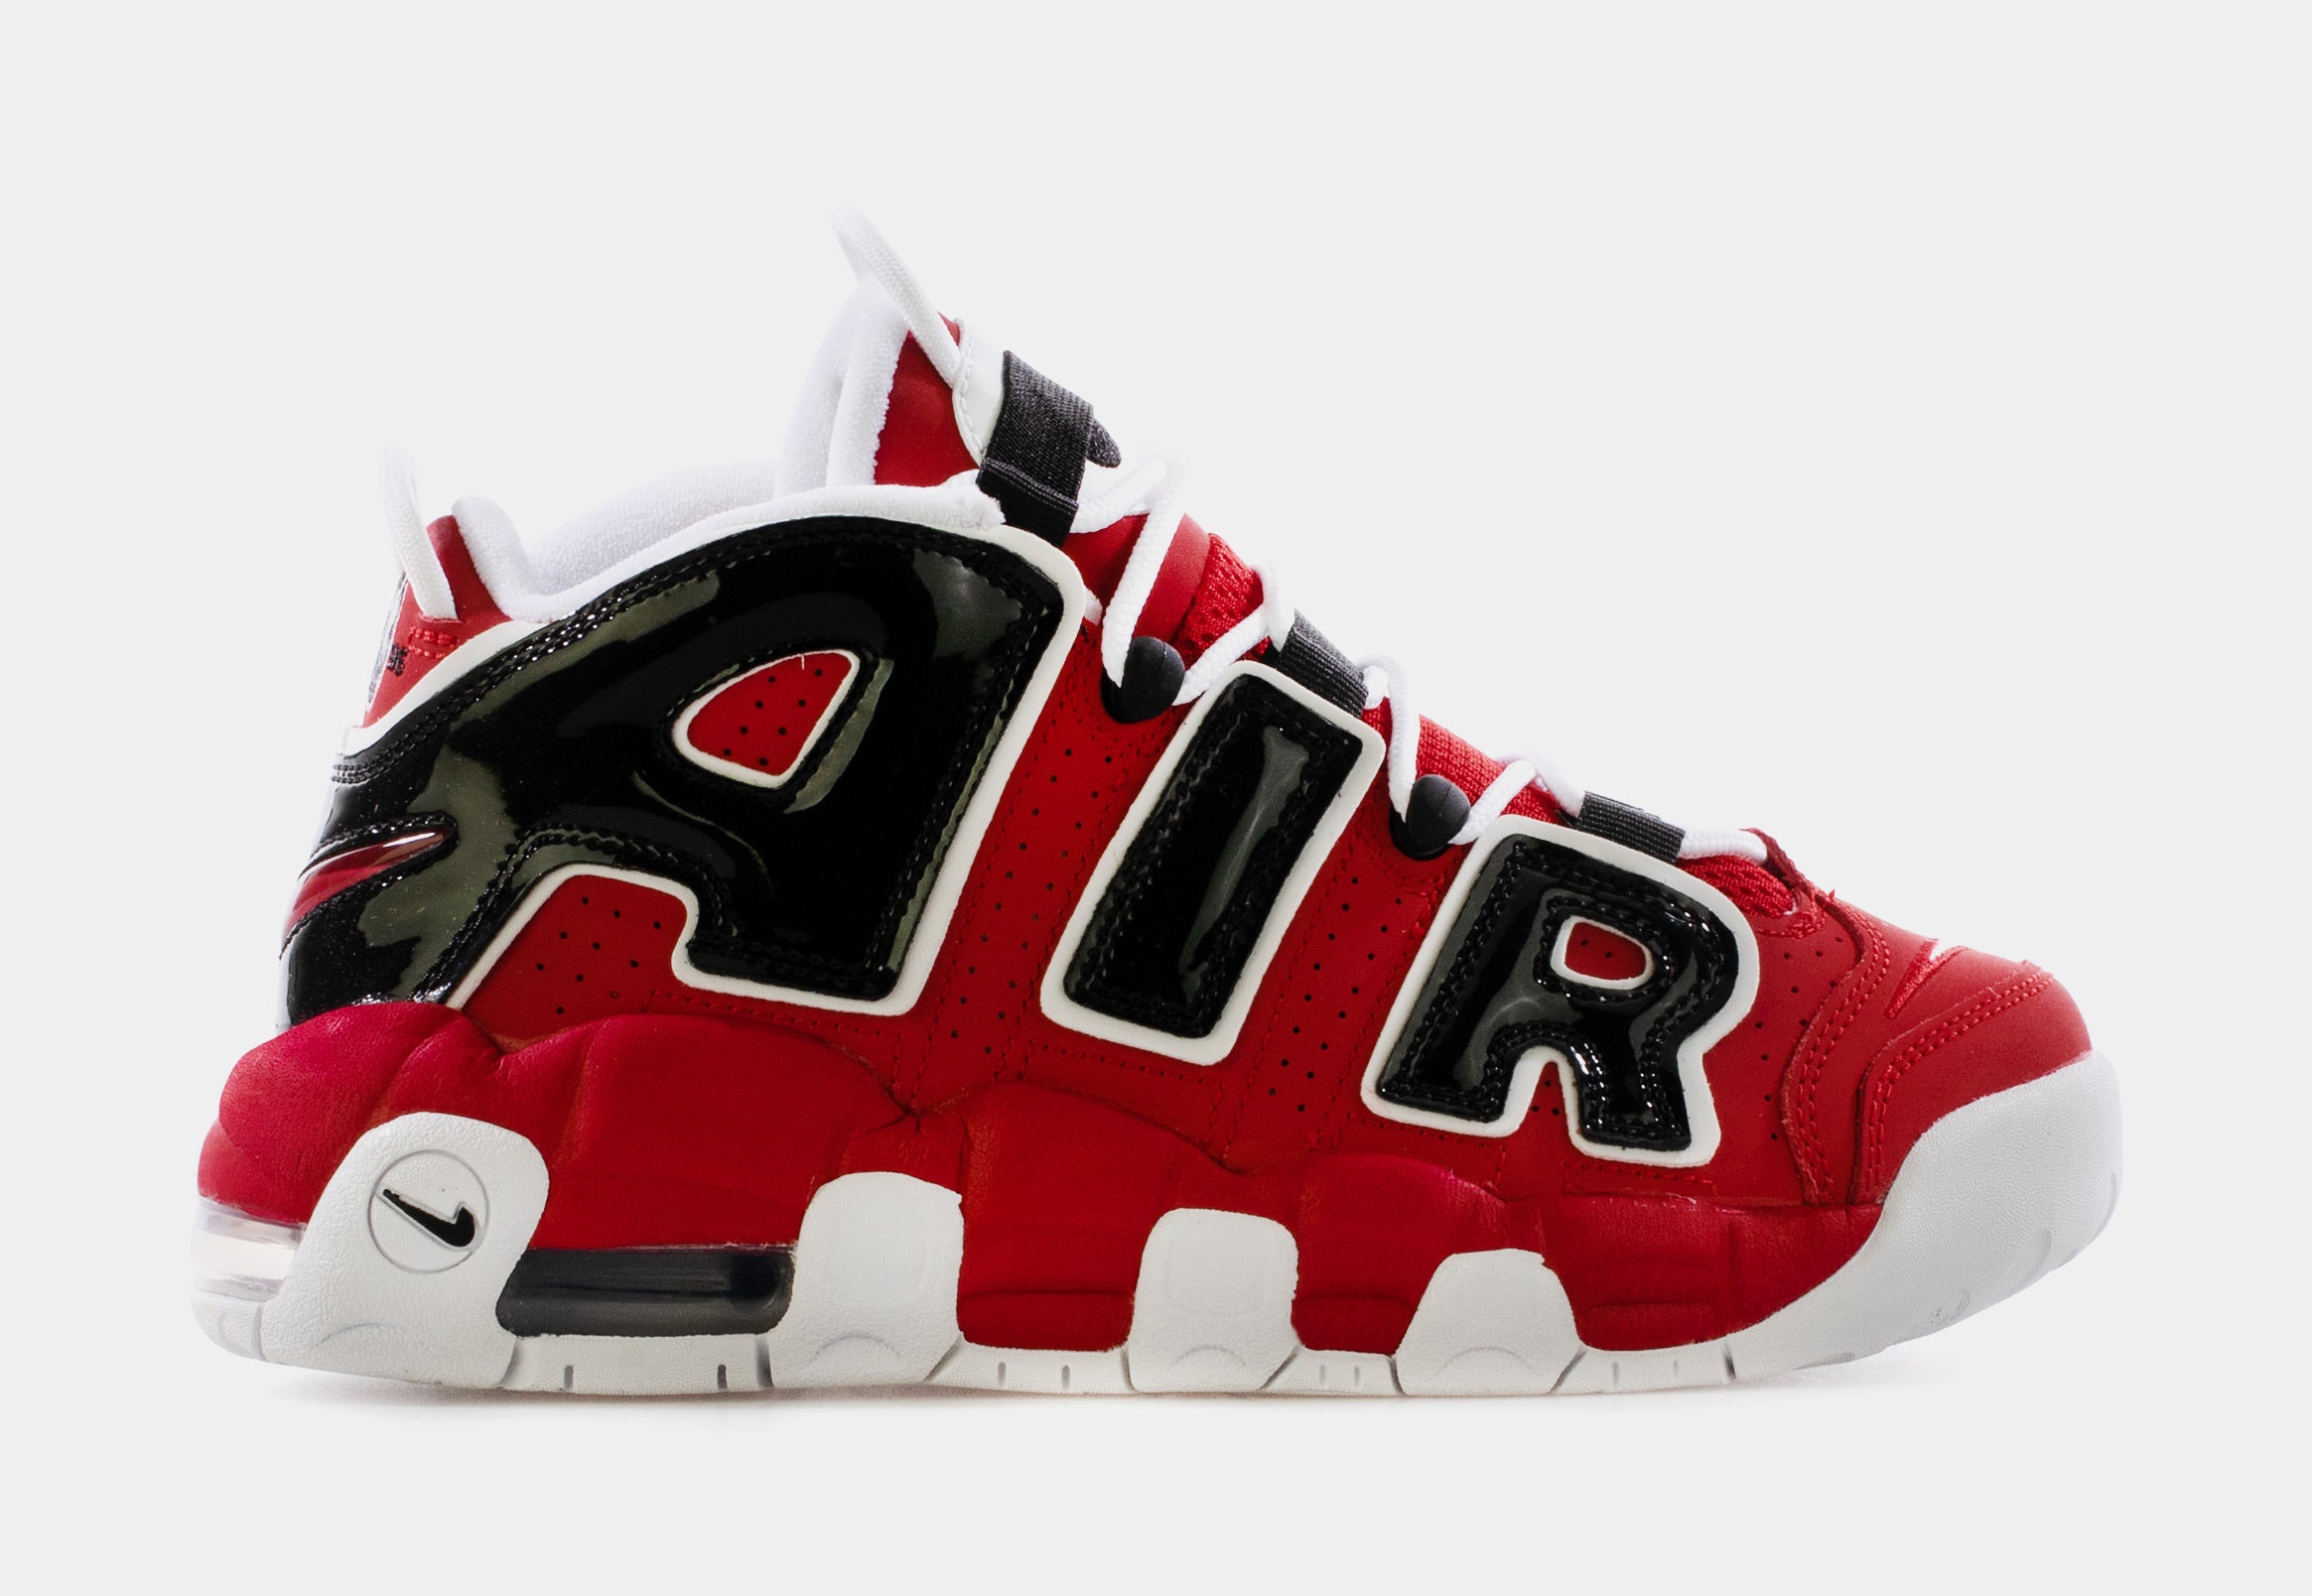 Nike Air More Uptempo Red Toe Mens Basketball Shoes Black Red FD0274-001 –  Shoe Palace